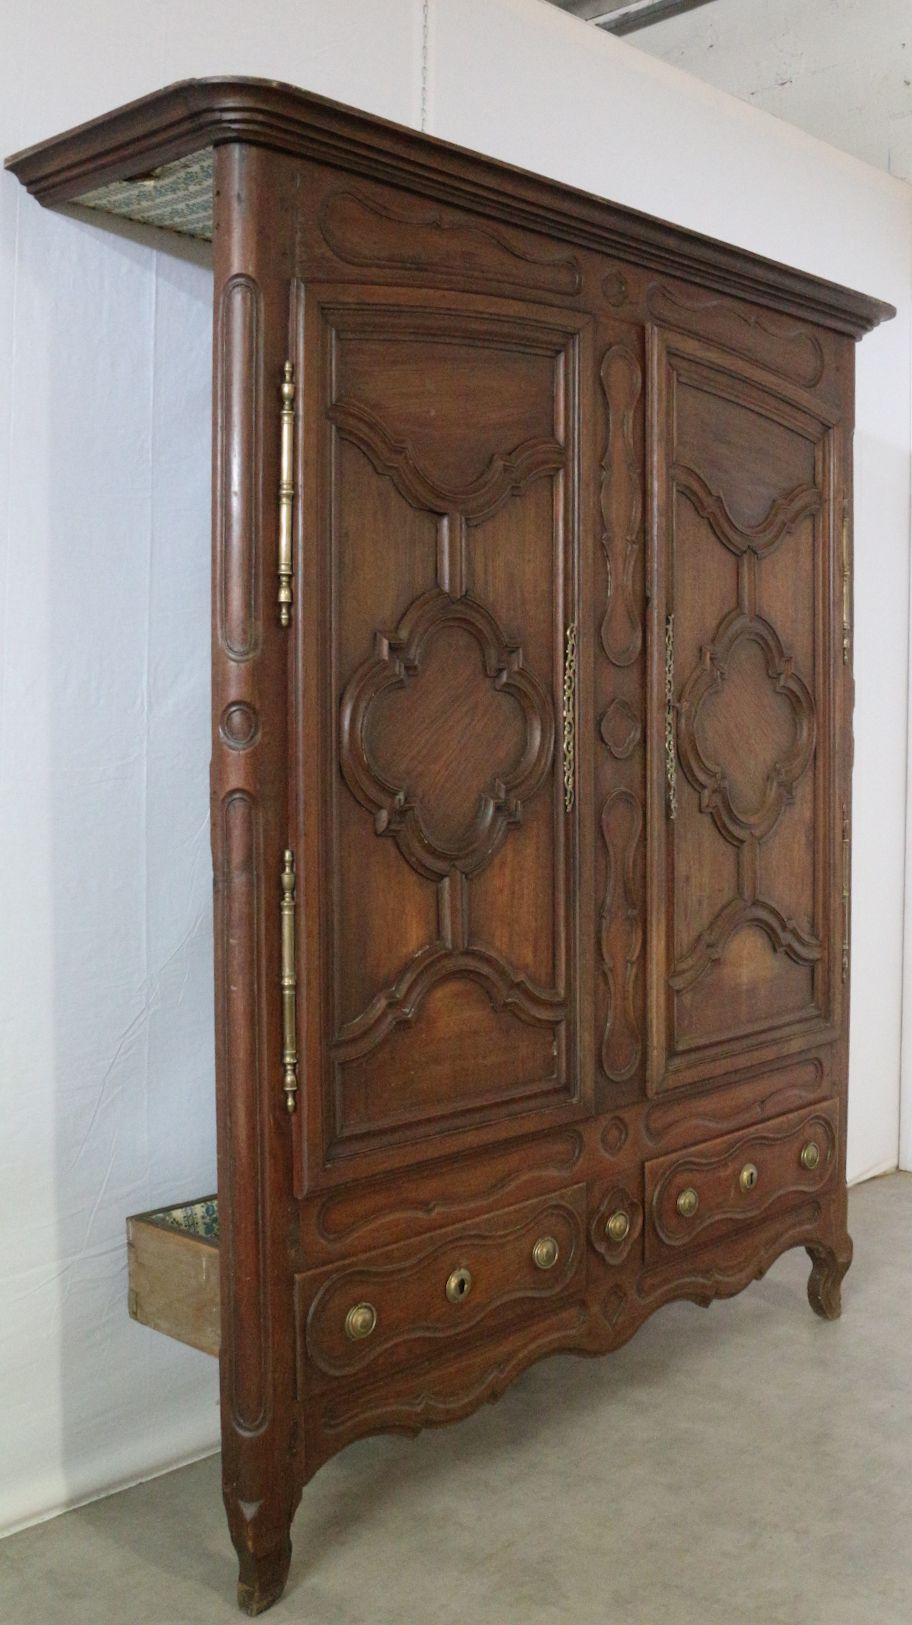 Antique Armoire Doors for built-in wardrobe, hand carved Oak, superb patina due to time
18th century typical Provincial Cupboard from Northern France.
This has come from a typical French Maison de Maitre where it was used as a built in storage